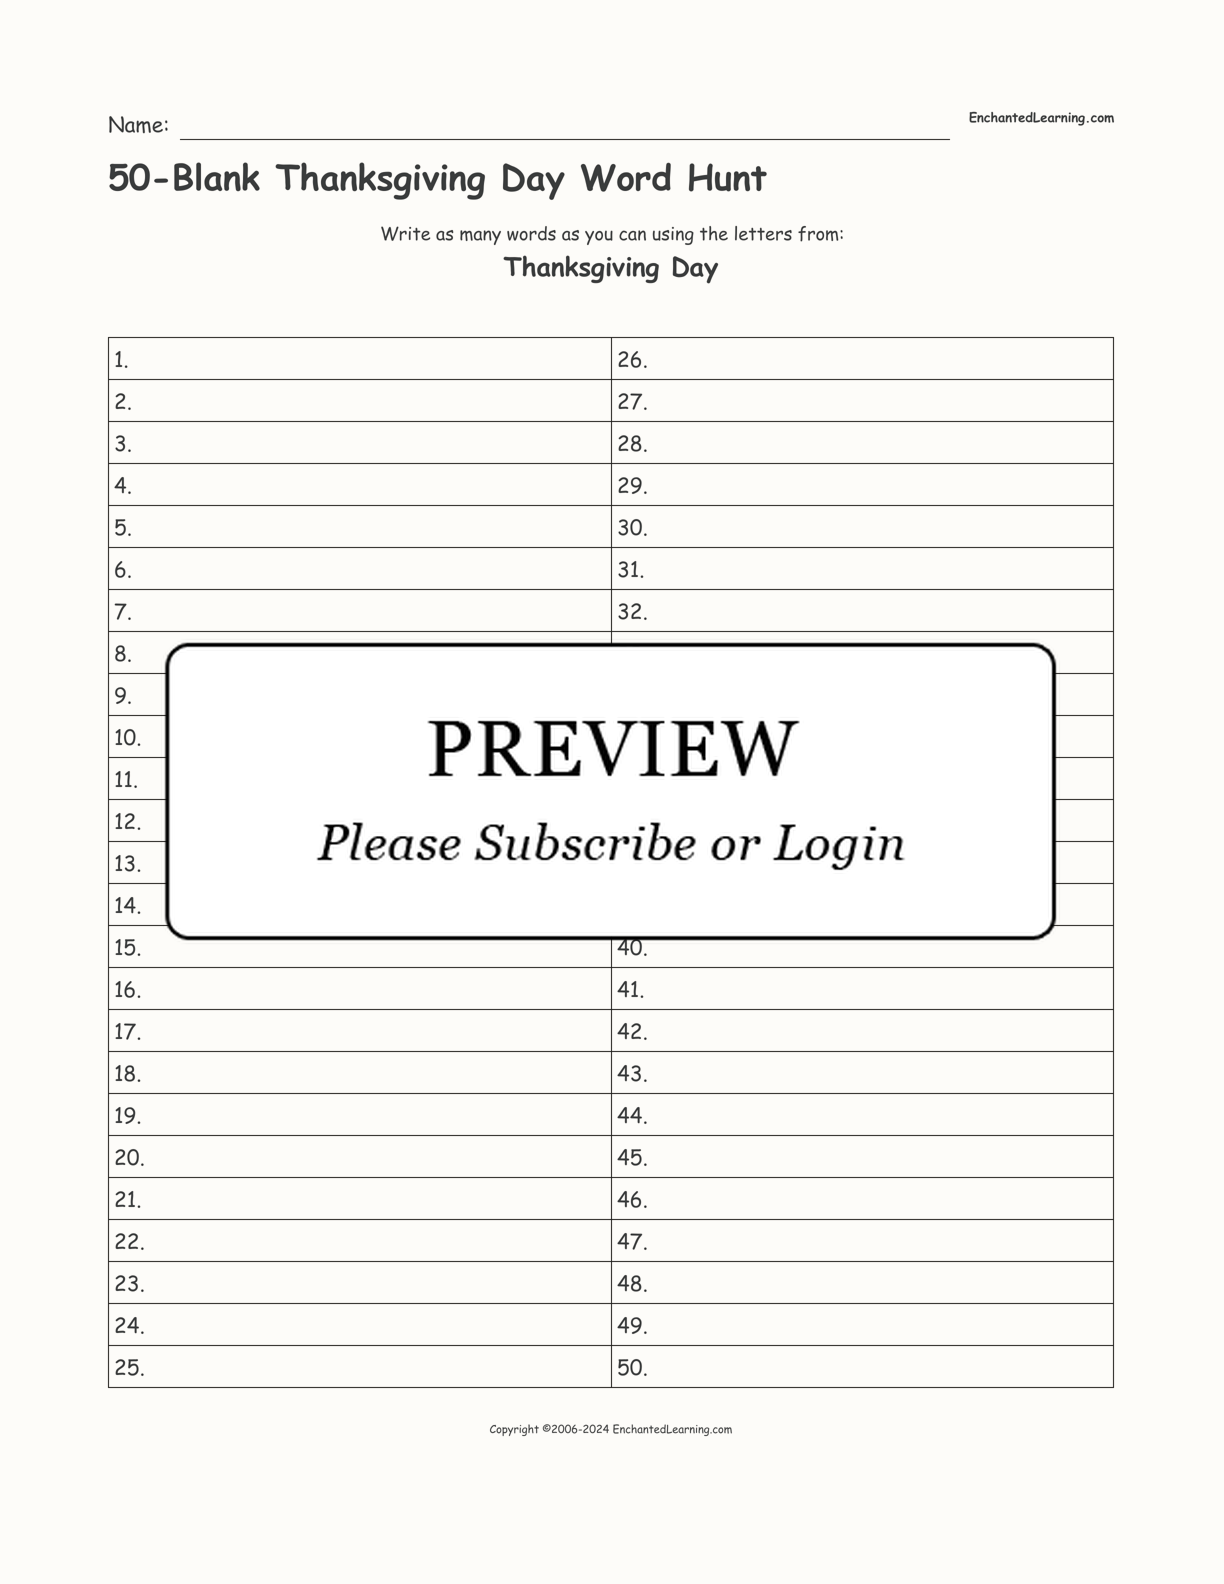 50-Blank Thanksgiving Day Word Hunt interactive worksheet page 1